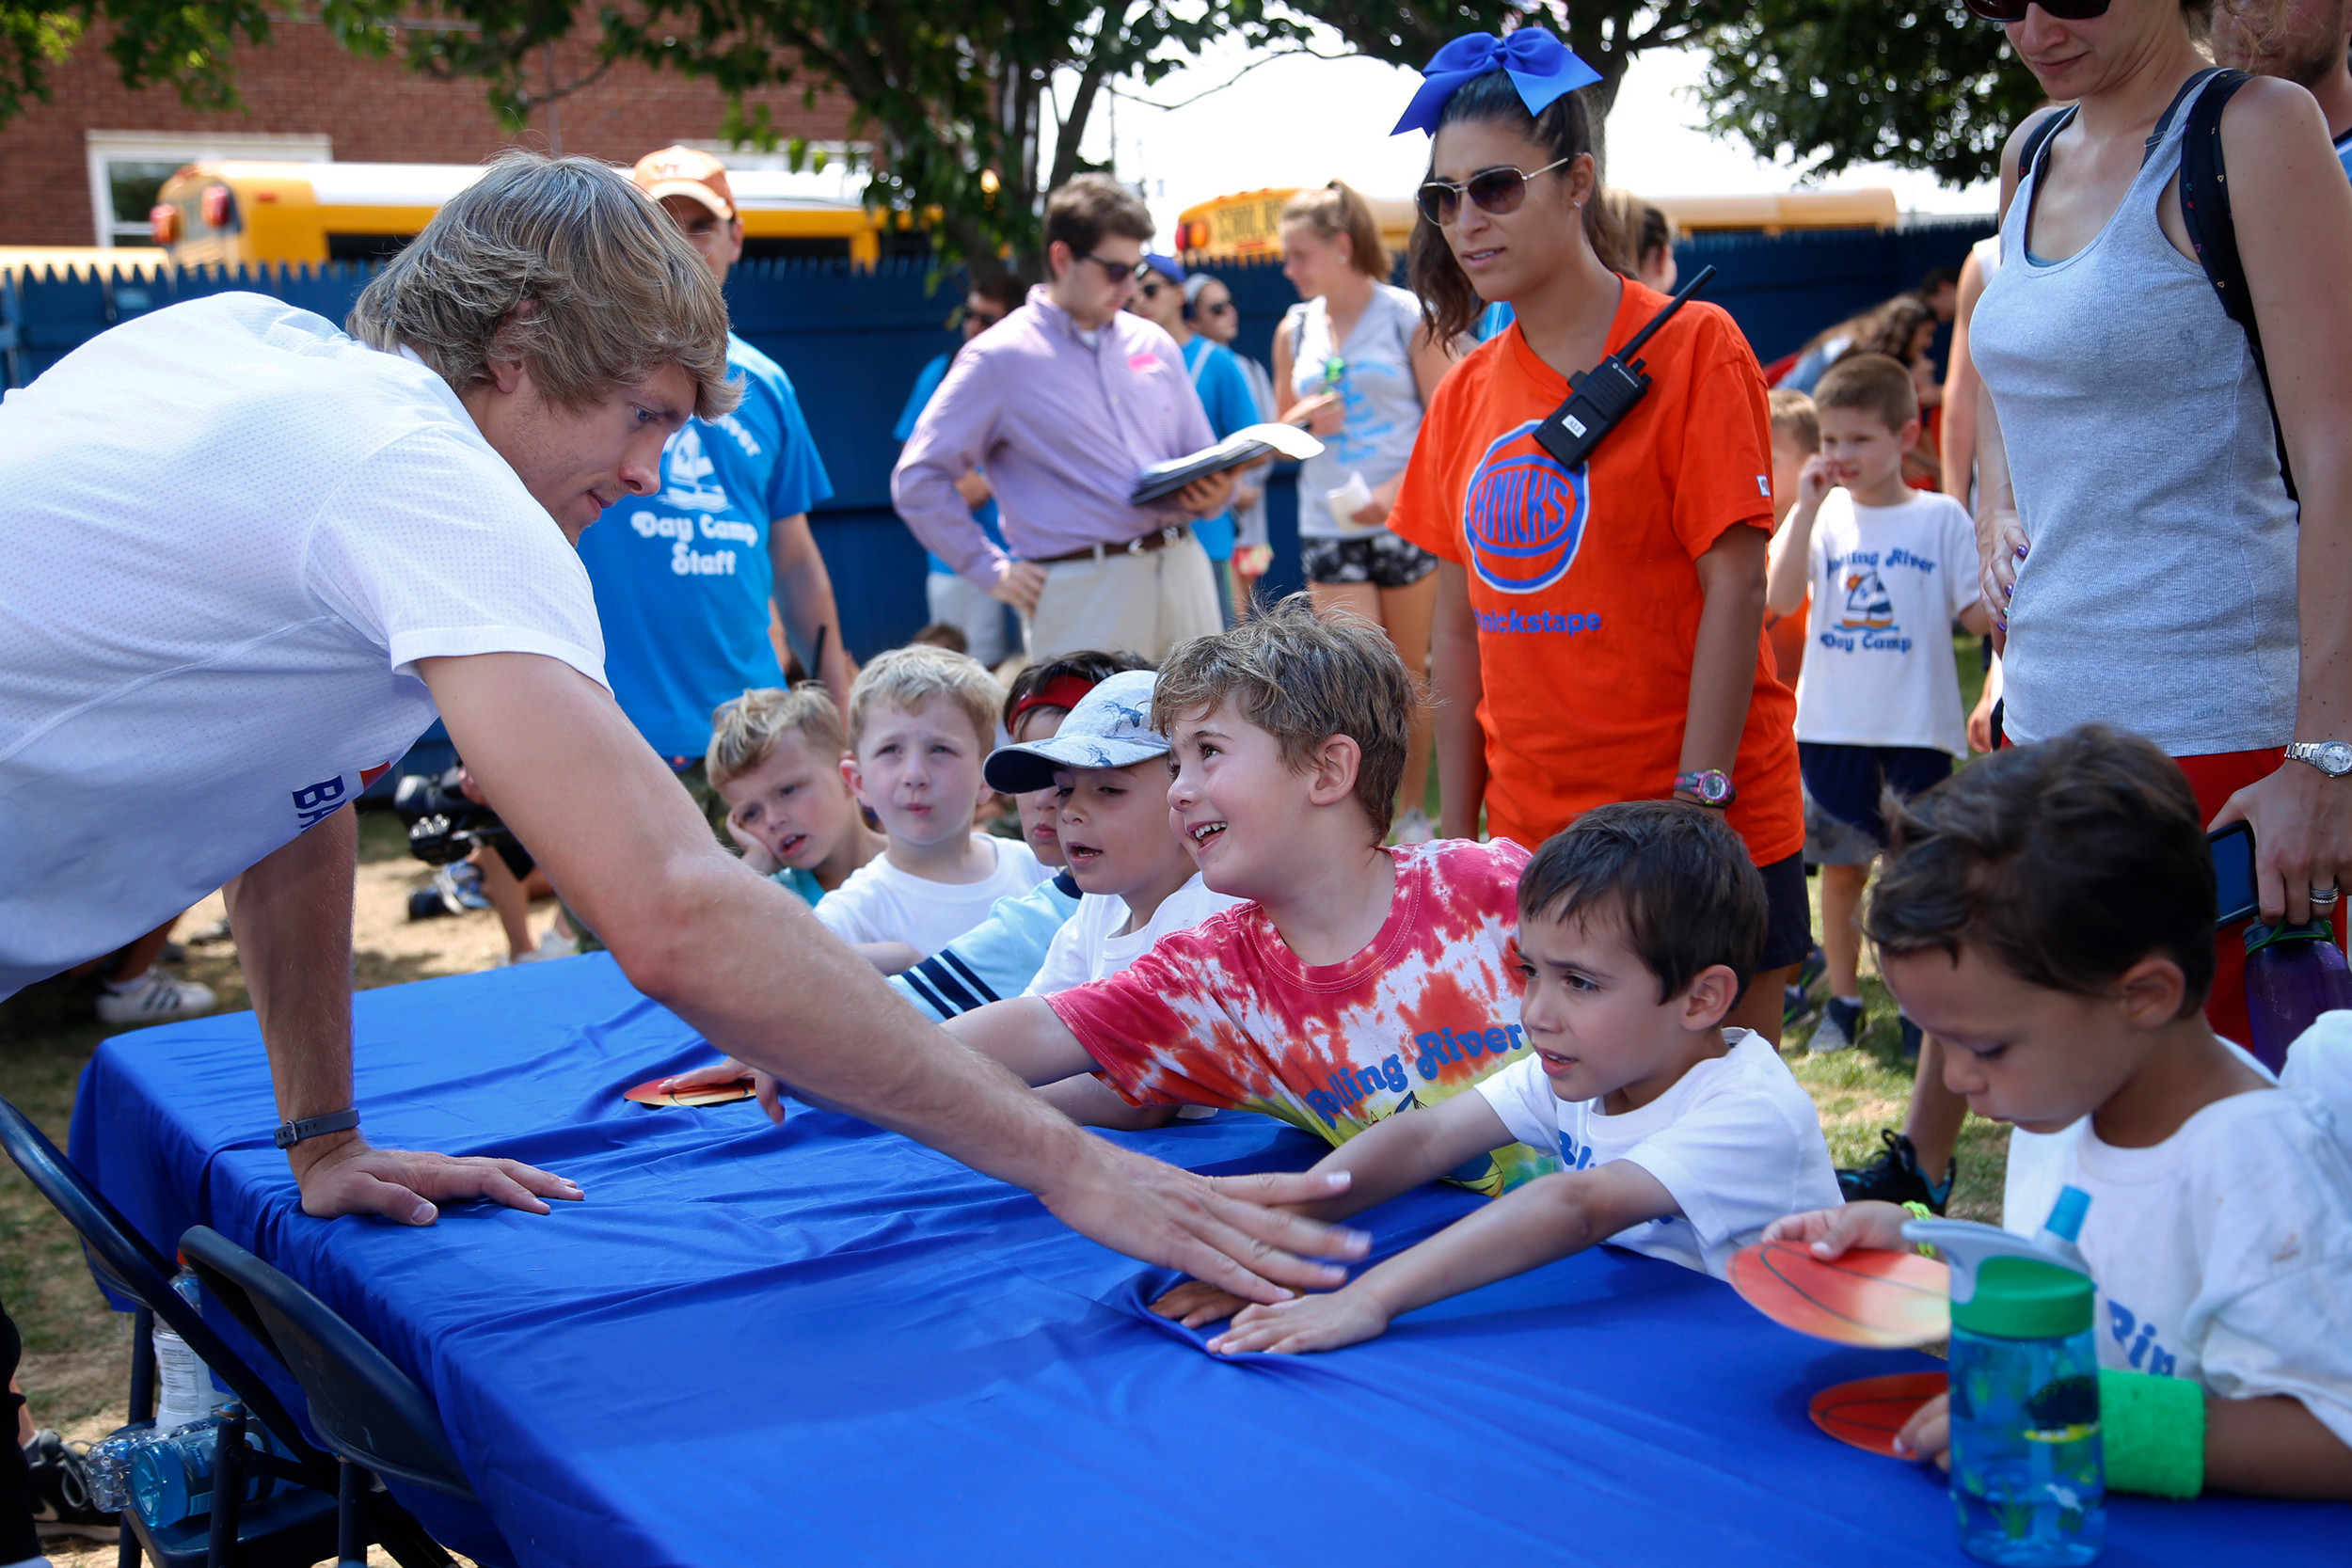 New York Knicks point guard Ron Baker signed autographs for children at Rolling River Day Camp on Aug. 11.